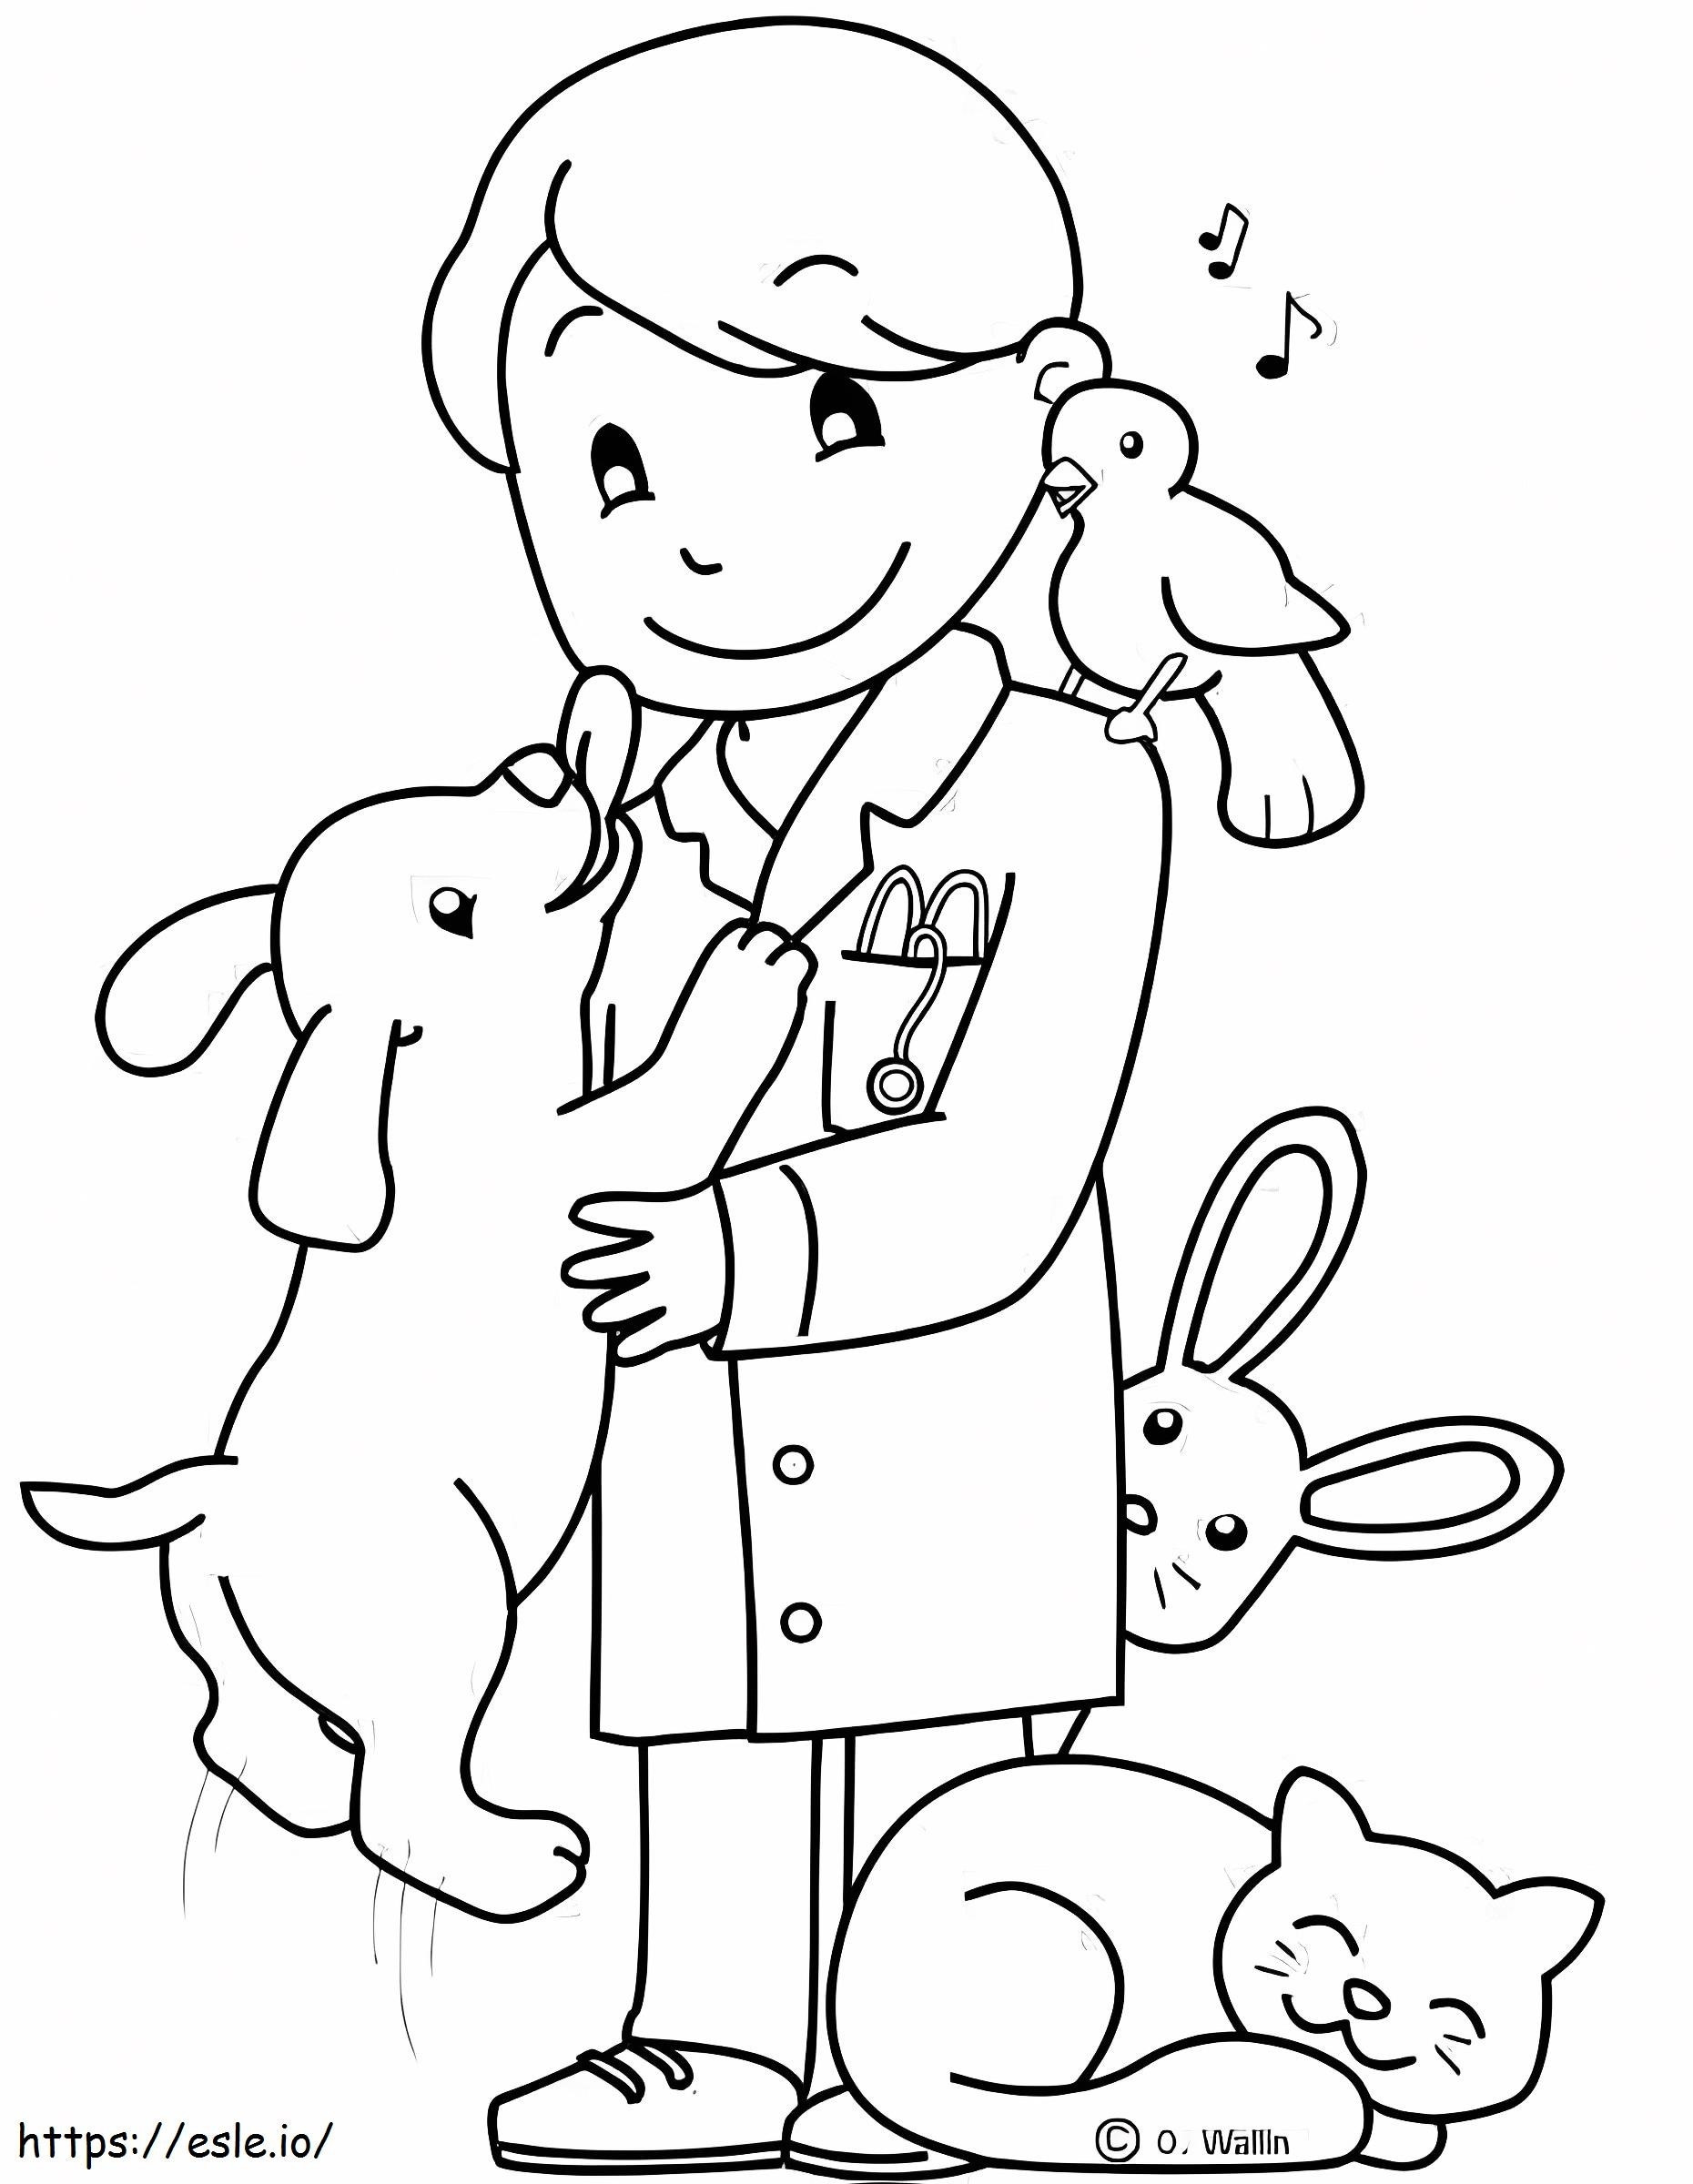 Vet Printable coloring page